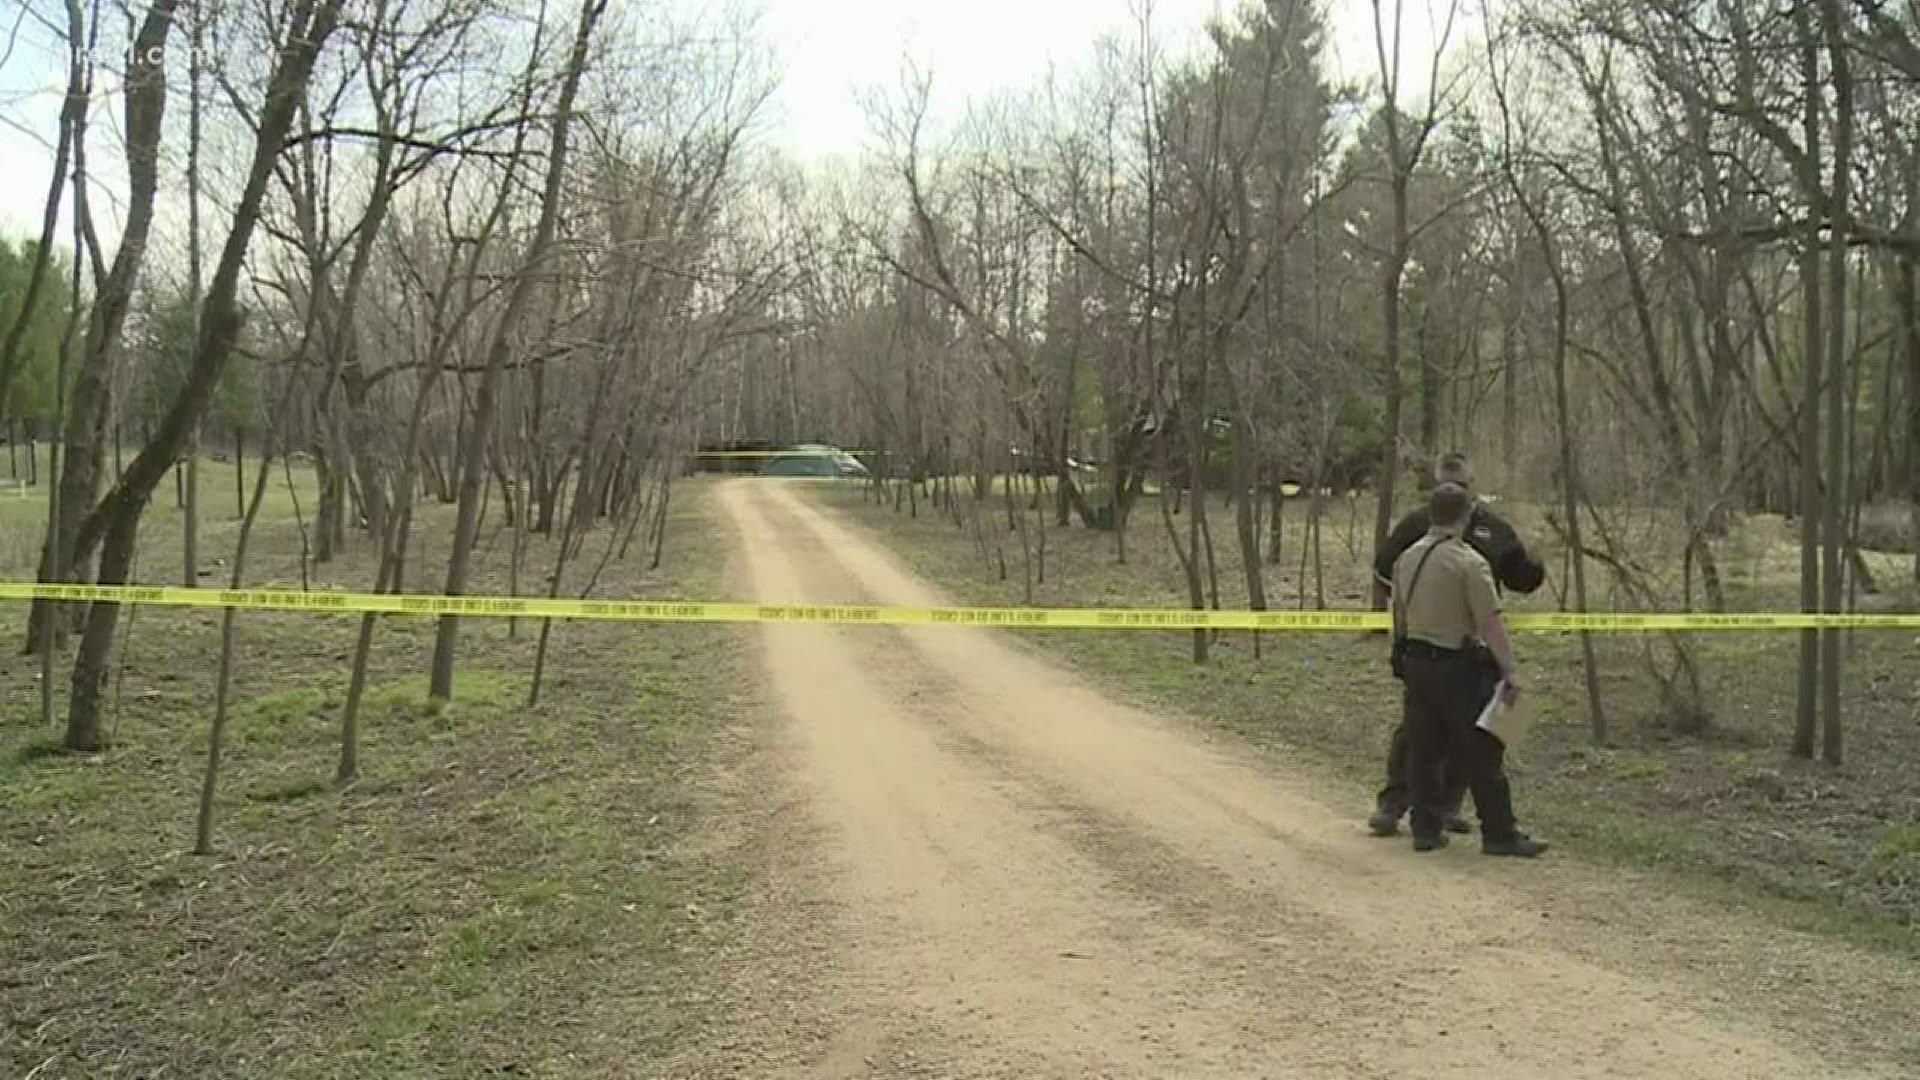 The sheriff says two men were found dead inside a home about two miles west of River Falls.